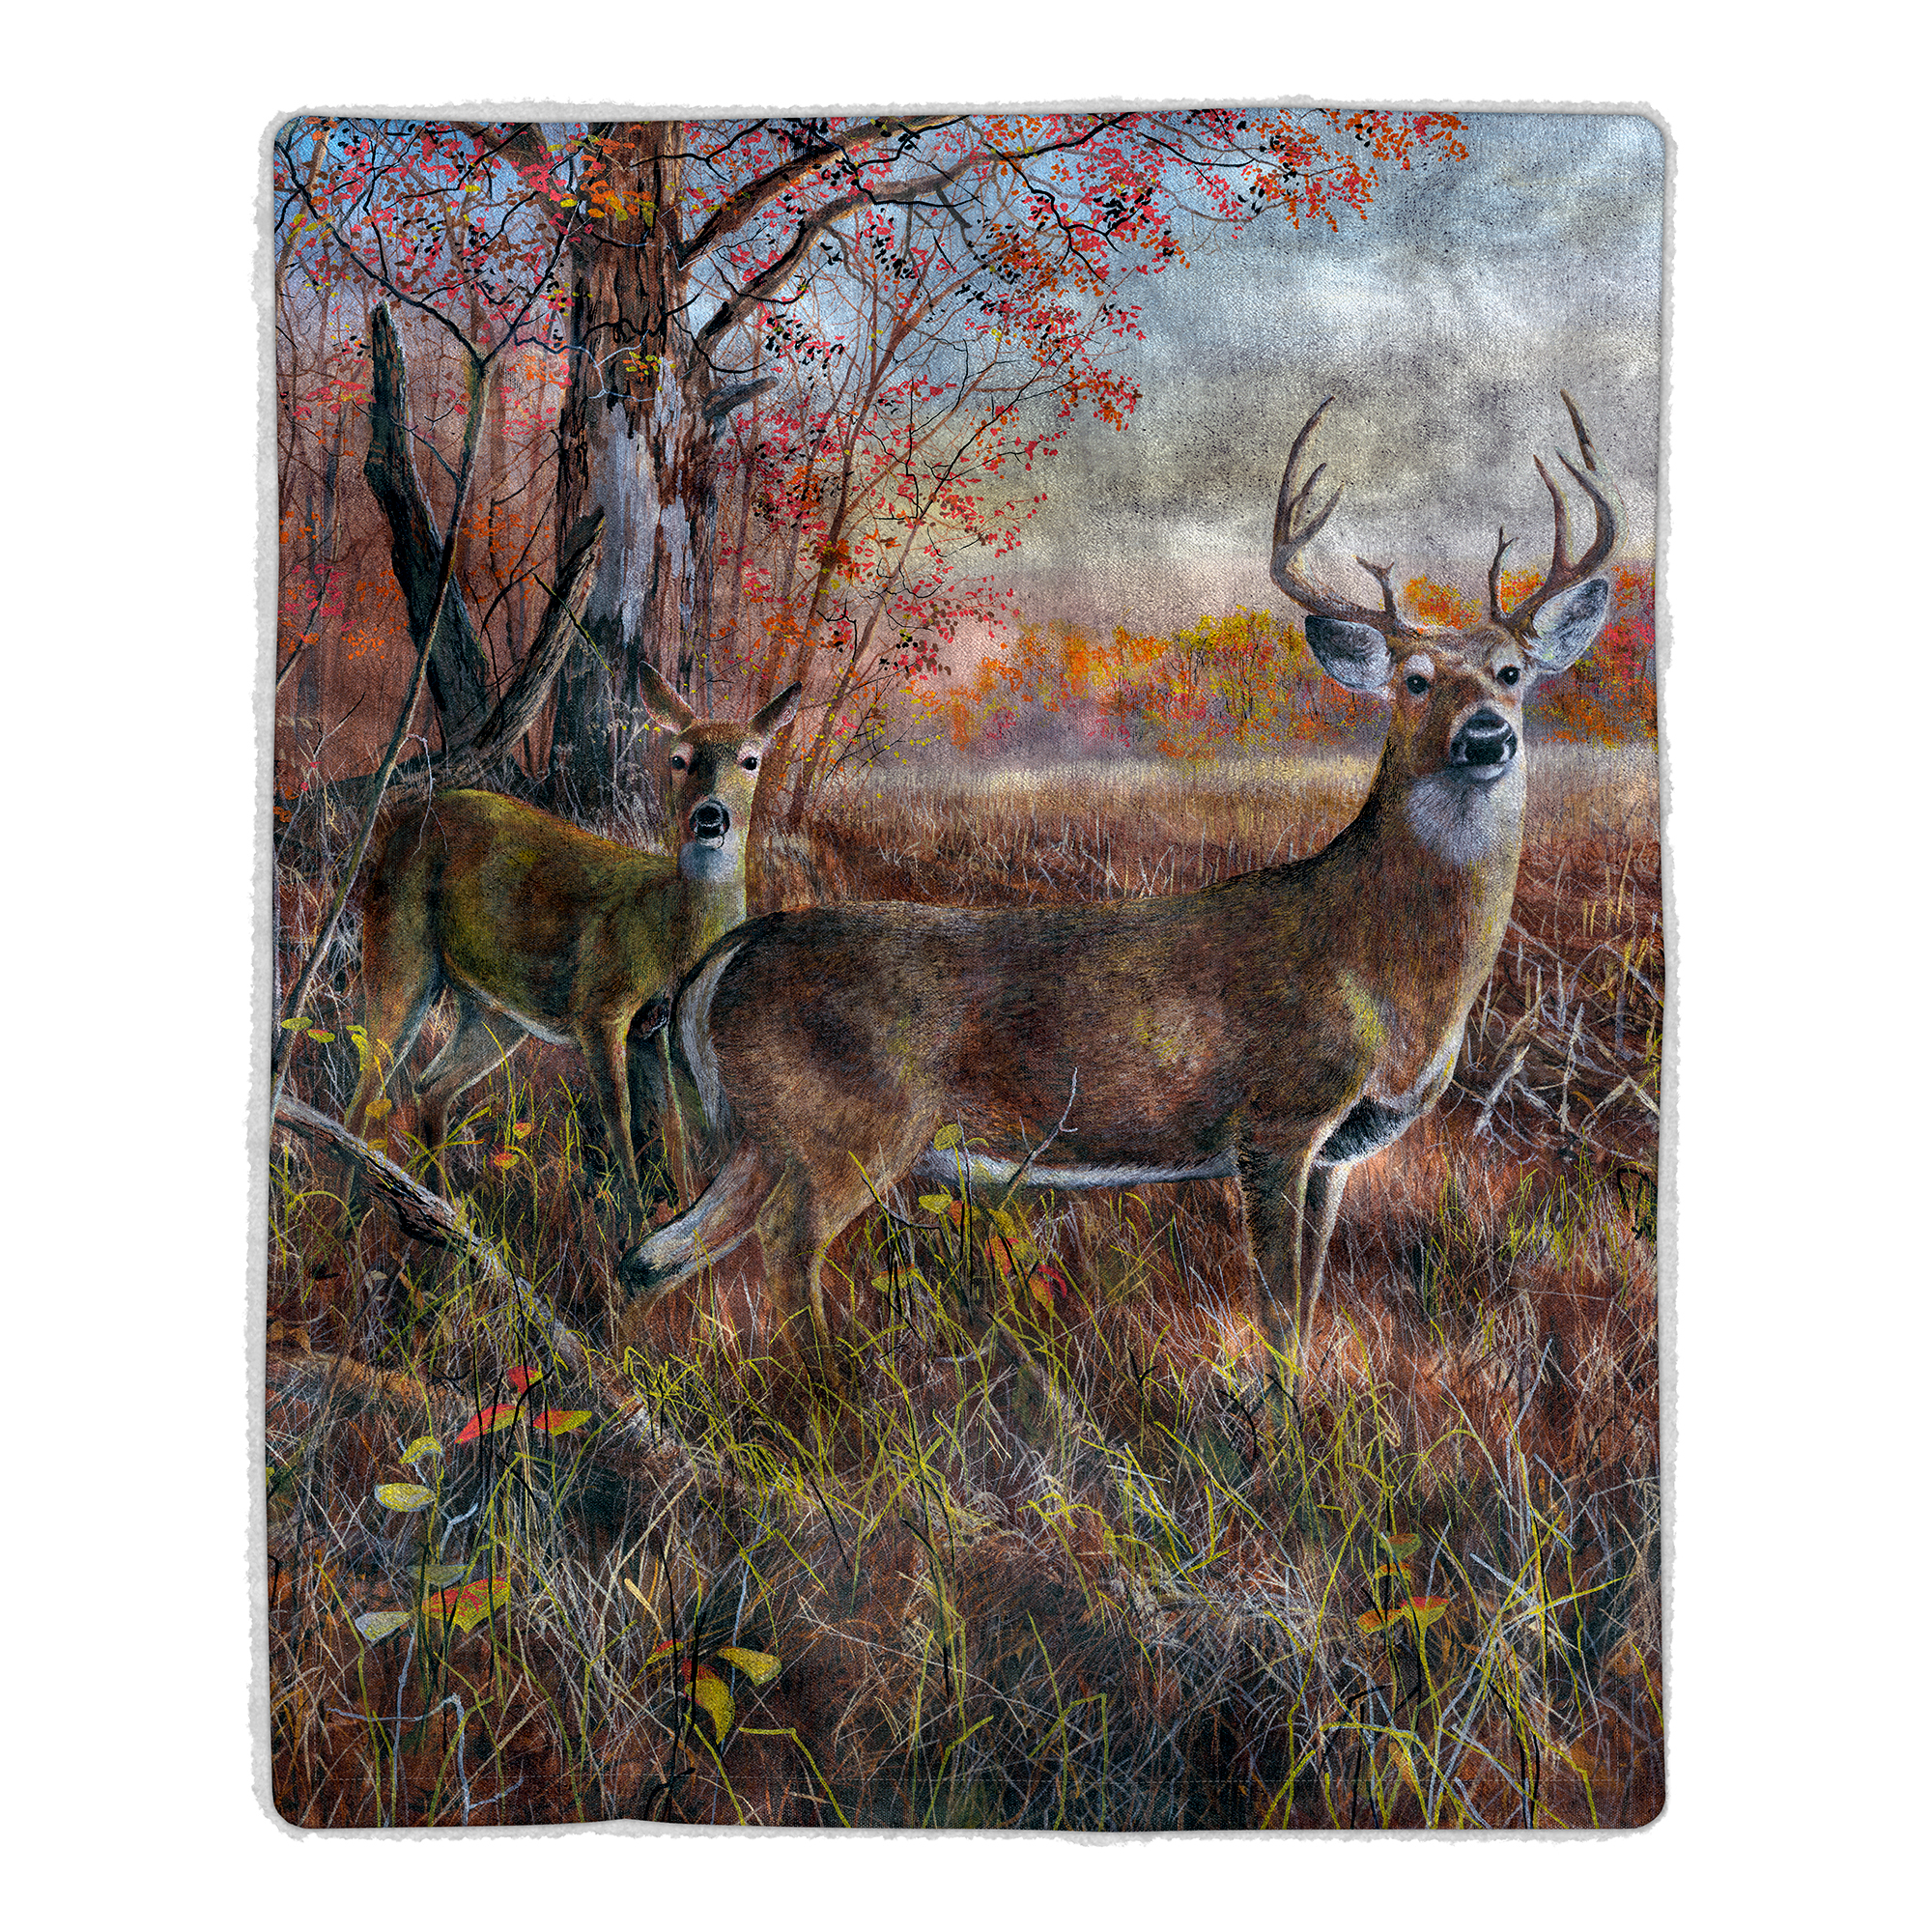 Fluffy Plush Throw Blanket 50 X 60 Inch - Deer Print Lightweight Hypoallergenic Bed Or Couch Soft Plush